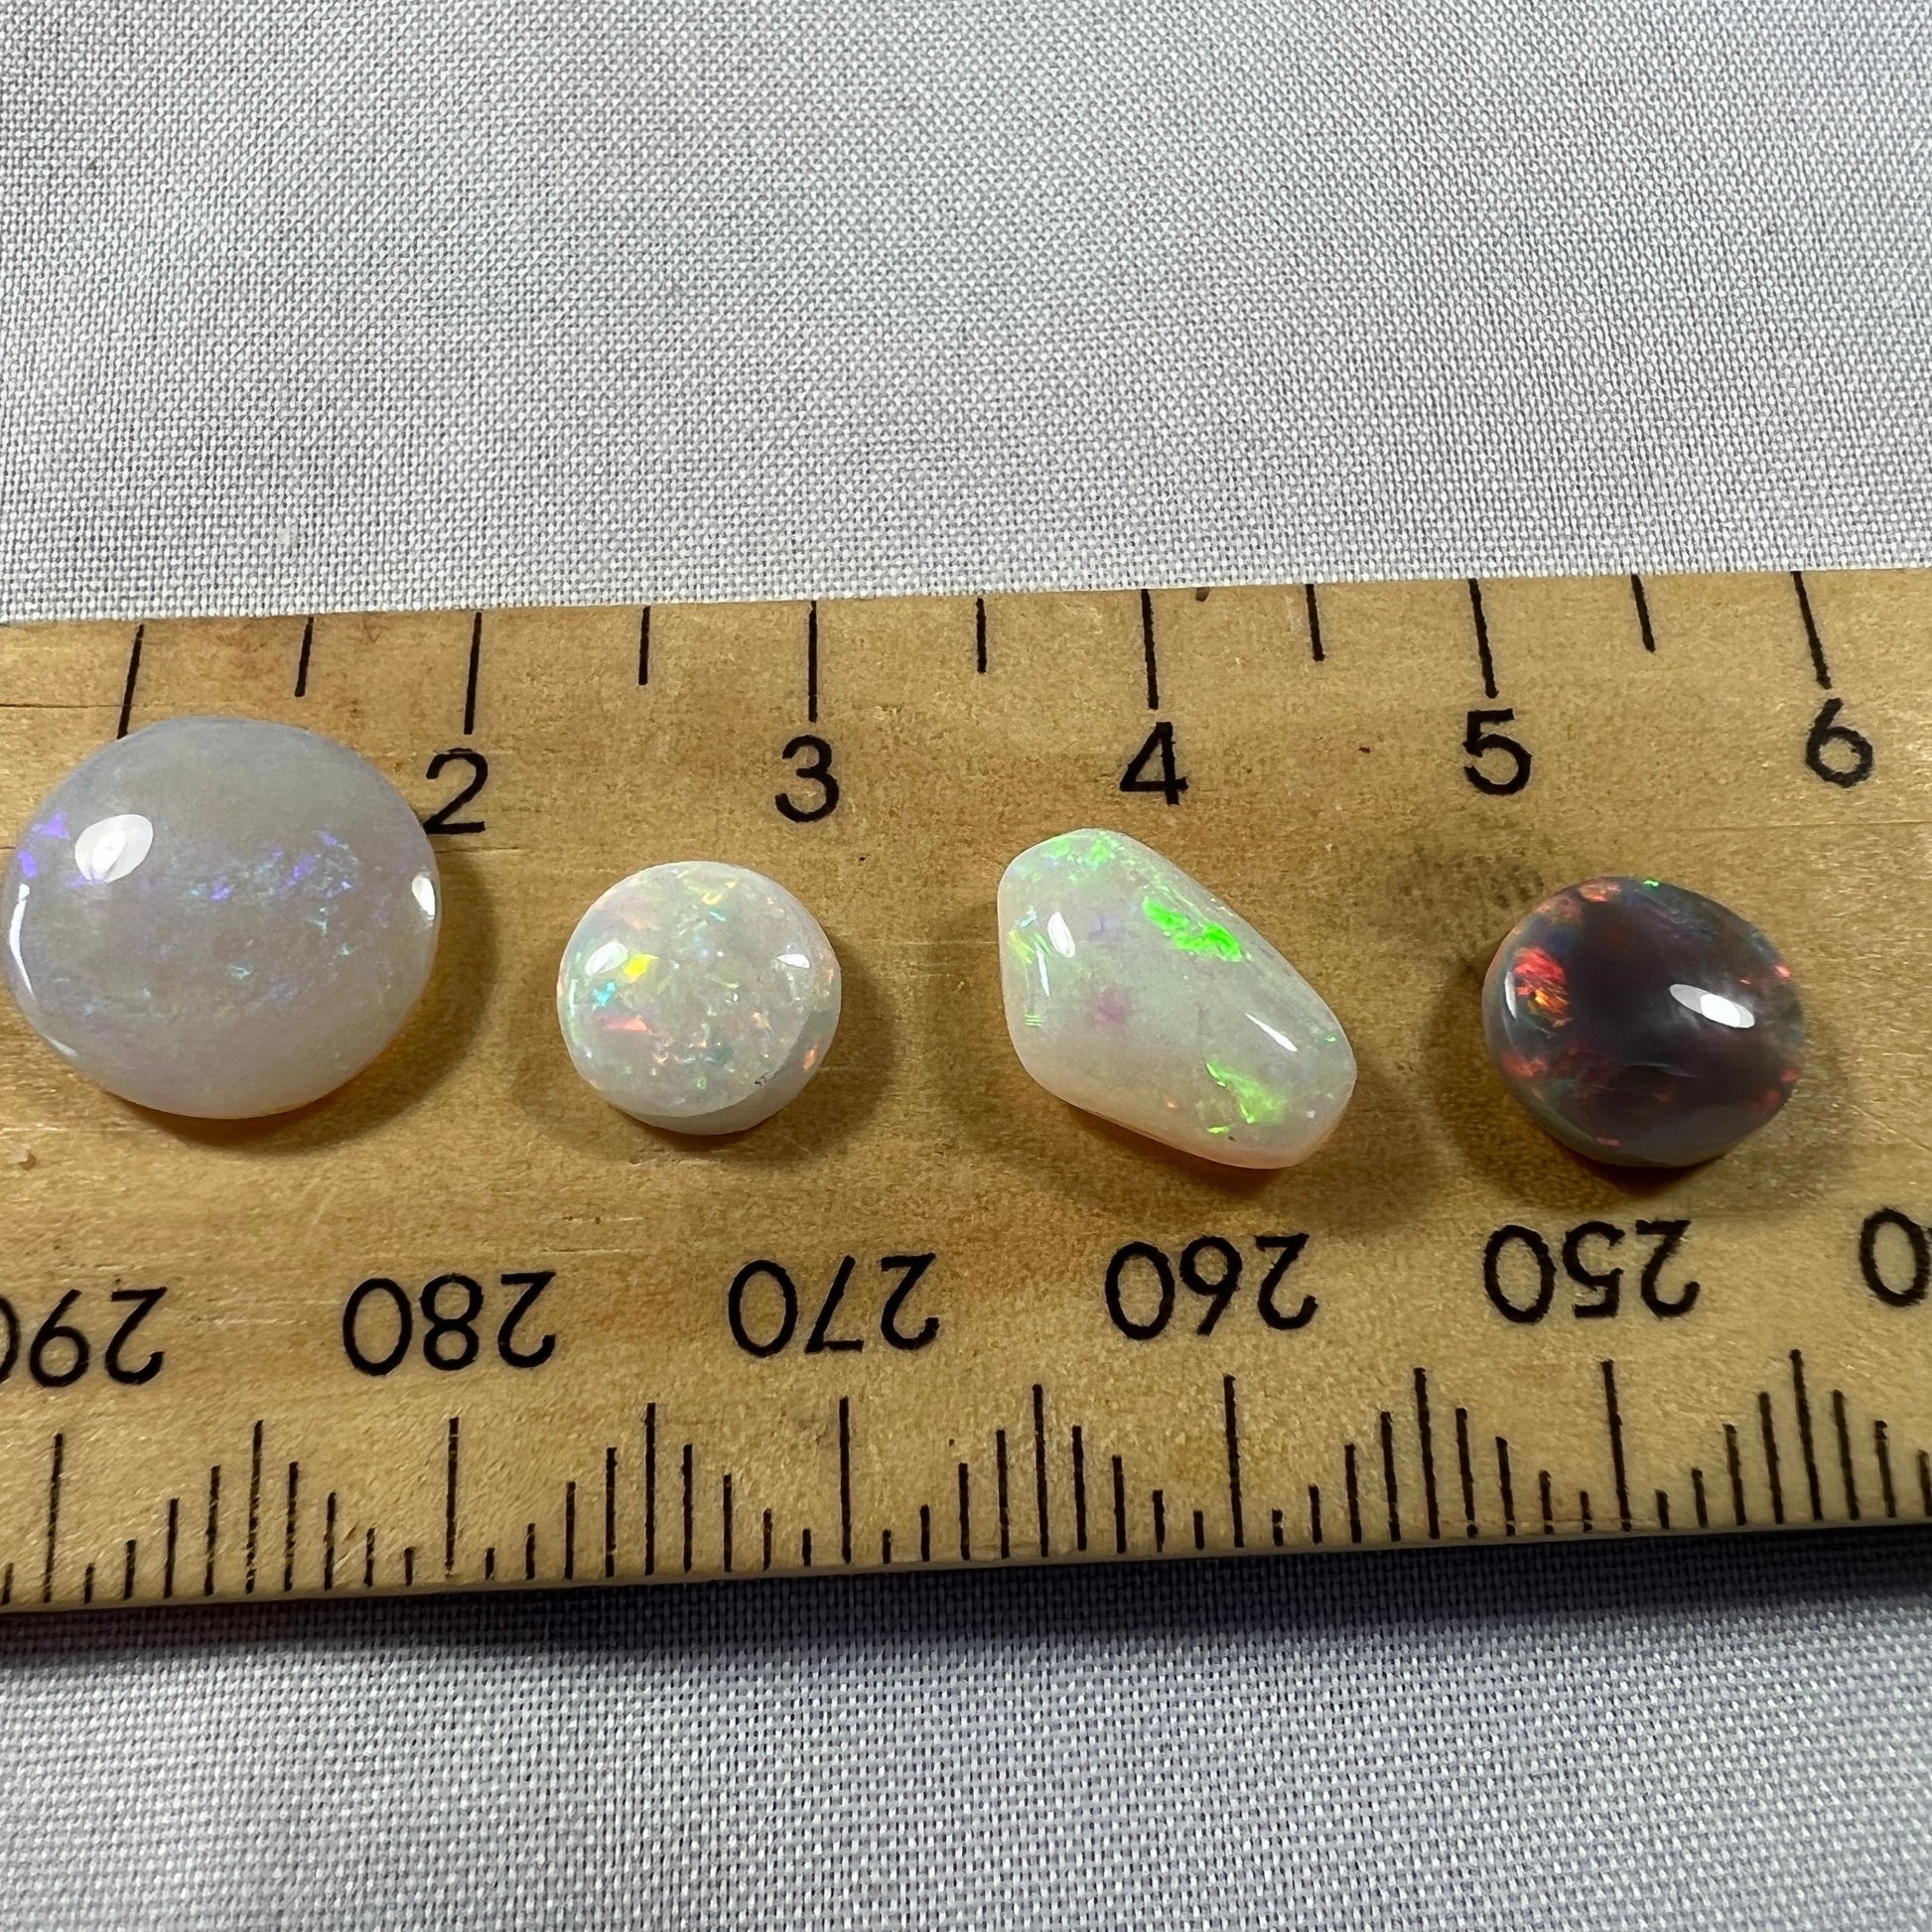 Small mixed group of four lovely solid opals that will make great ring stones. Cut and polished by Bill Johnson.